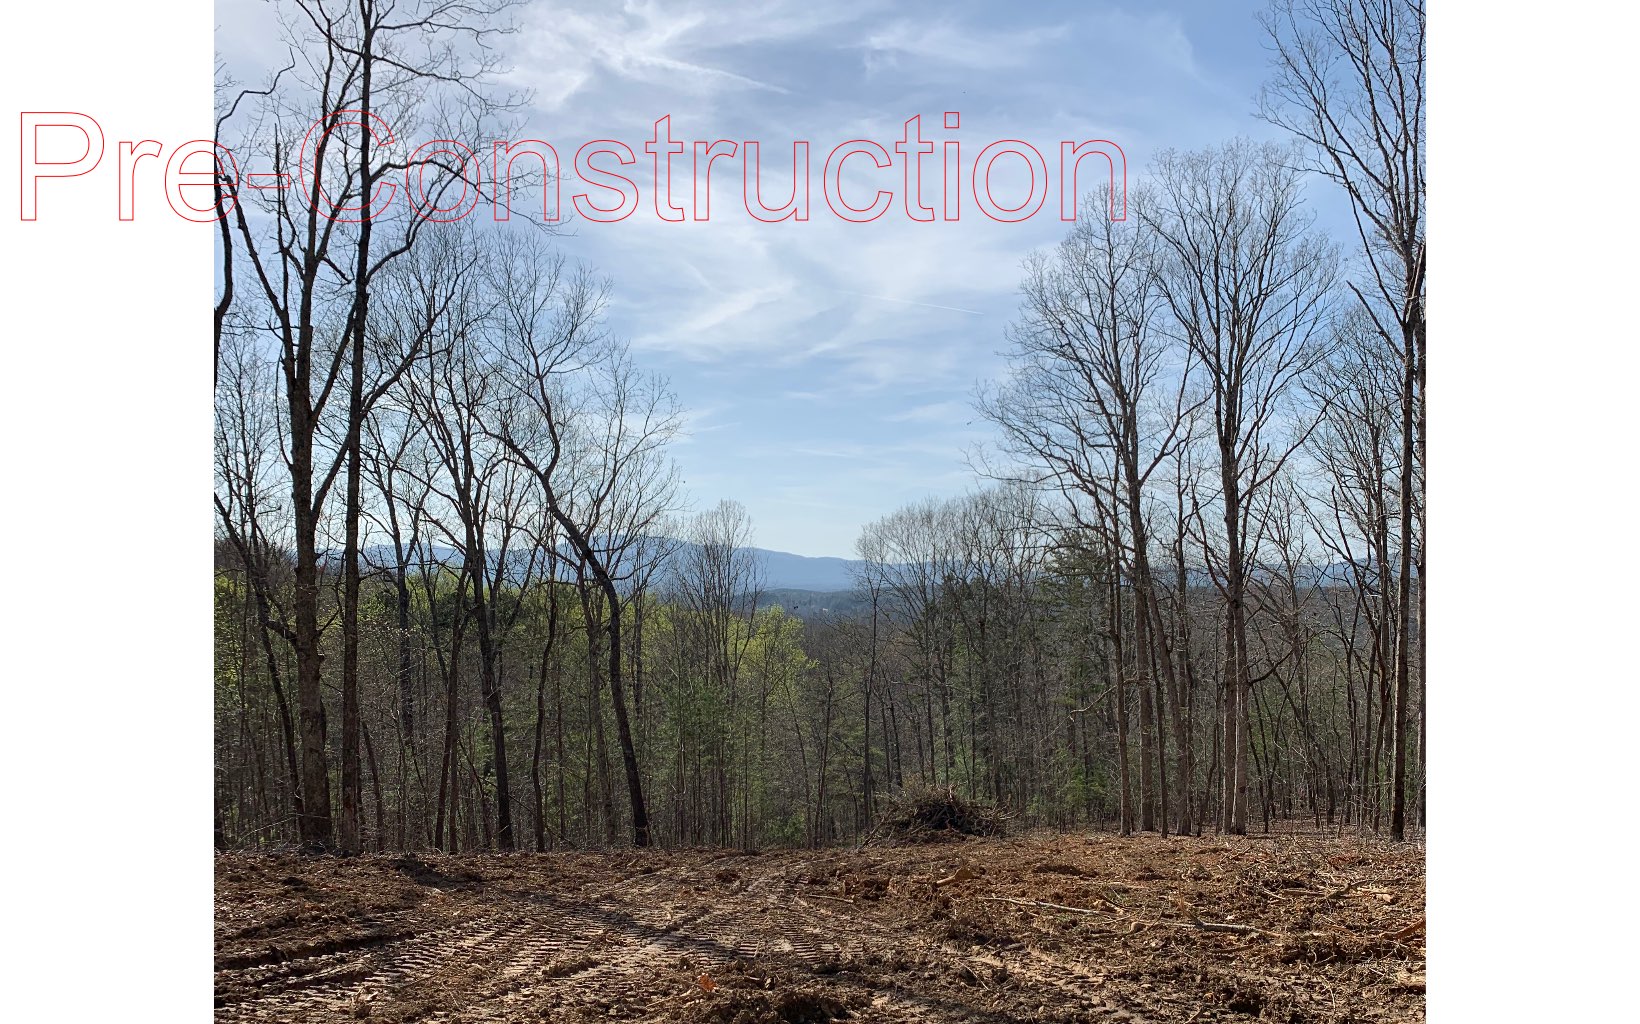 Pre-Construction. Home photos are representative of same builder, same house plan as photos, view pics actual site. Tucked away quaint mountain cabin coming soon! Welcoming 3 bedroom/3.5 bath situated on a 1.49 acre wooded tract over looking the beautiful mountain range, large covered porches, massive stone fireplaces, enriched great room & dining room, open floor concept, kitchen with plenty of custom built cabinets & counters + bar area & loft is perfect for reading nook or home office, master bedroom & spa feel bathroom with freestanding tub & walk-in shower, roomy & gentle outdoor area great for entertaining with firepit & mountain views, easy access just off paved road, plentiful parking, glass galore... custom built cabin will be conveniently located in a brand new rustic community...Great for full time living or that much needed getaway...perfect vacation rental potential!